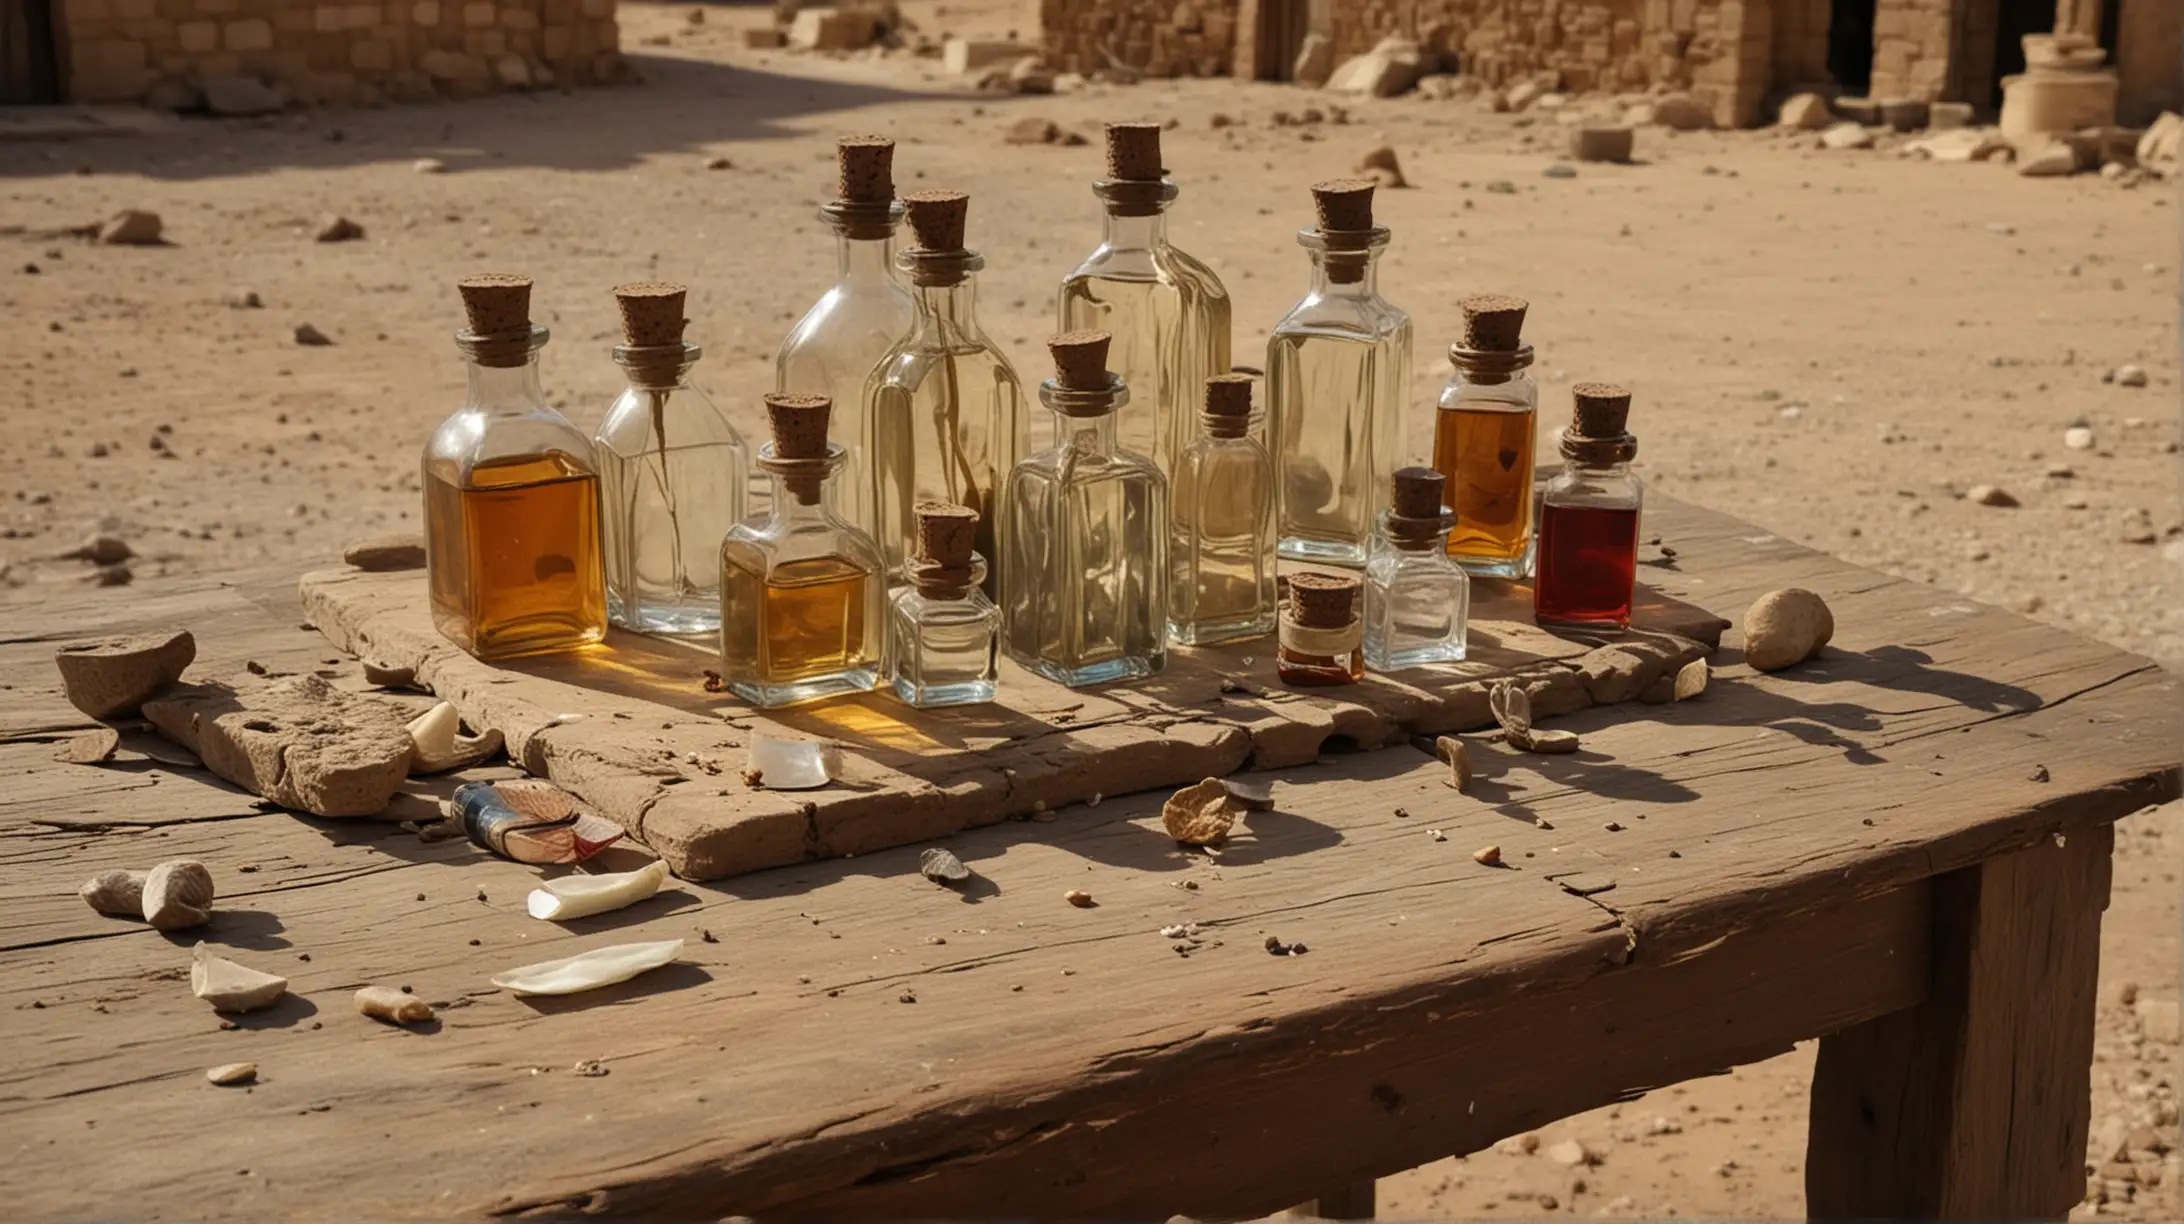 a close up of an old table, with some  bottles of perfume and some annointing oil set in a small desert  village scene, Set during the Era of the Biblical Moses.